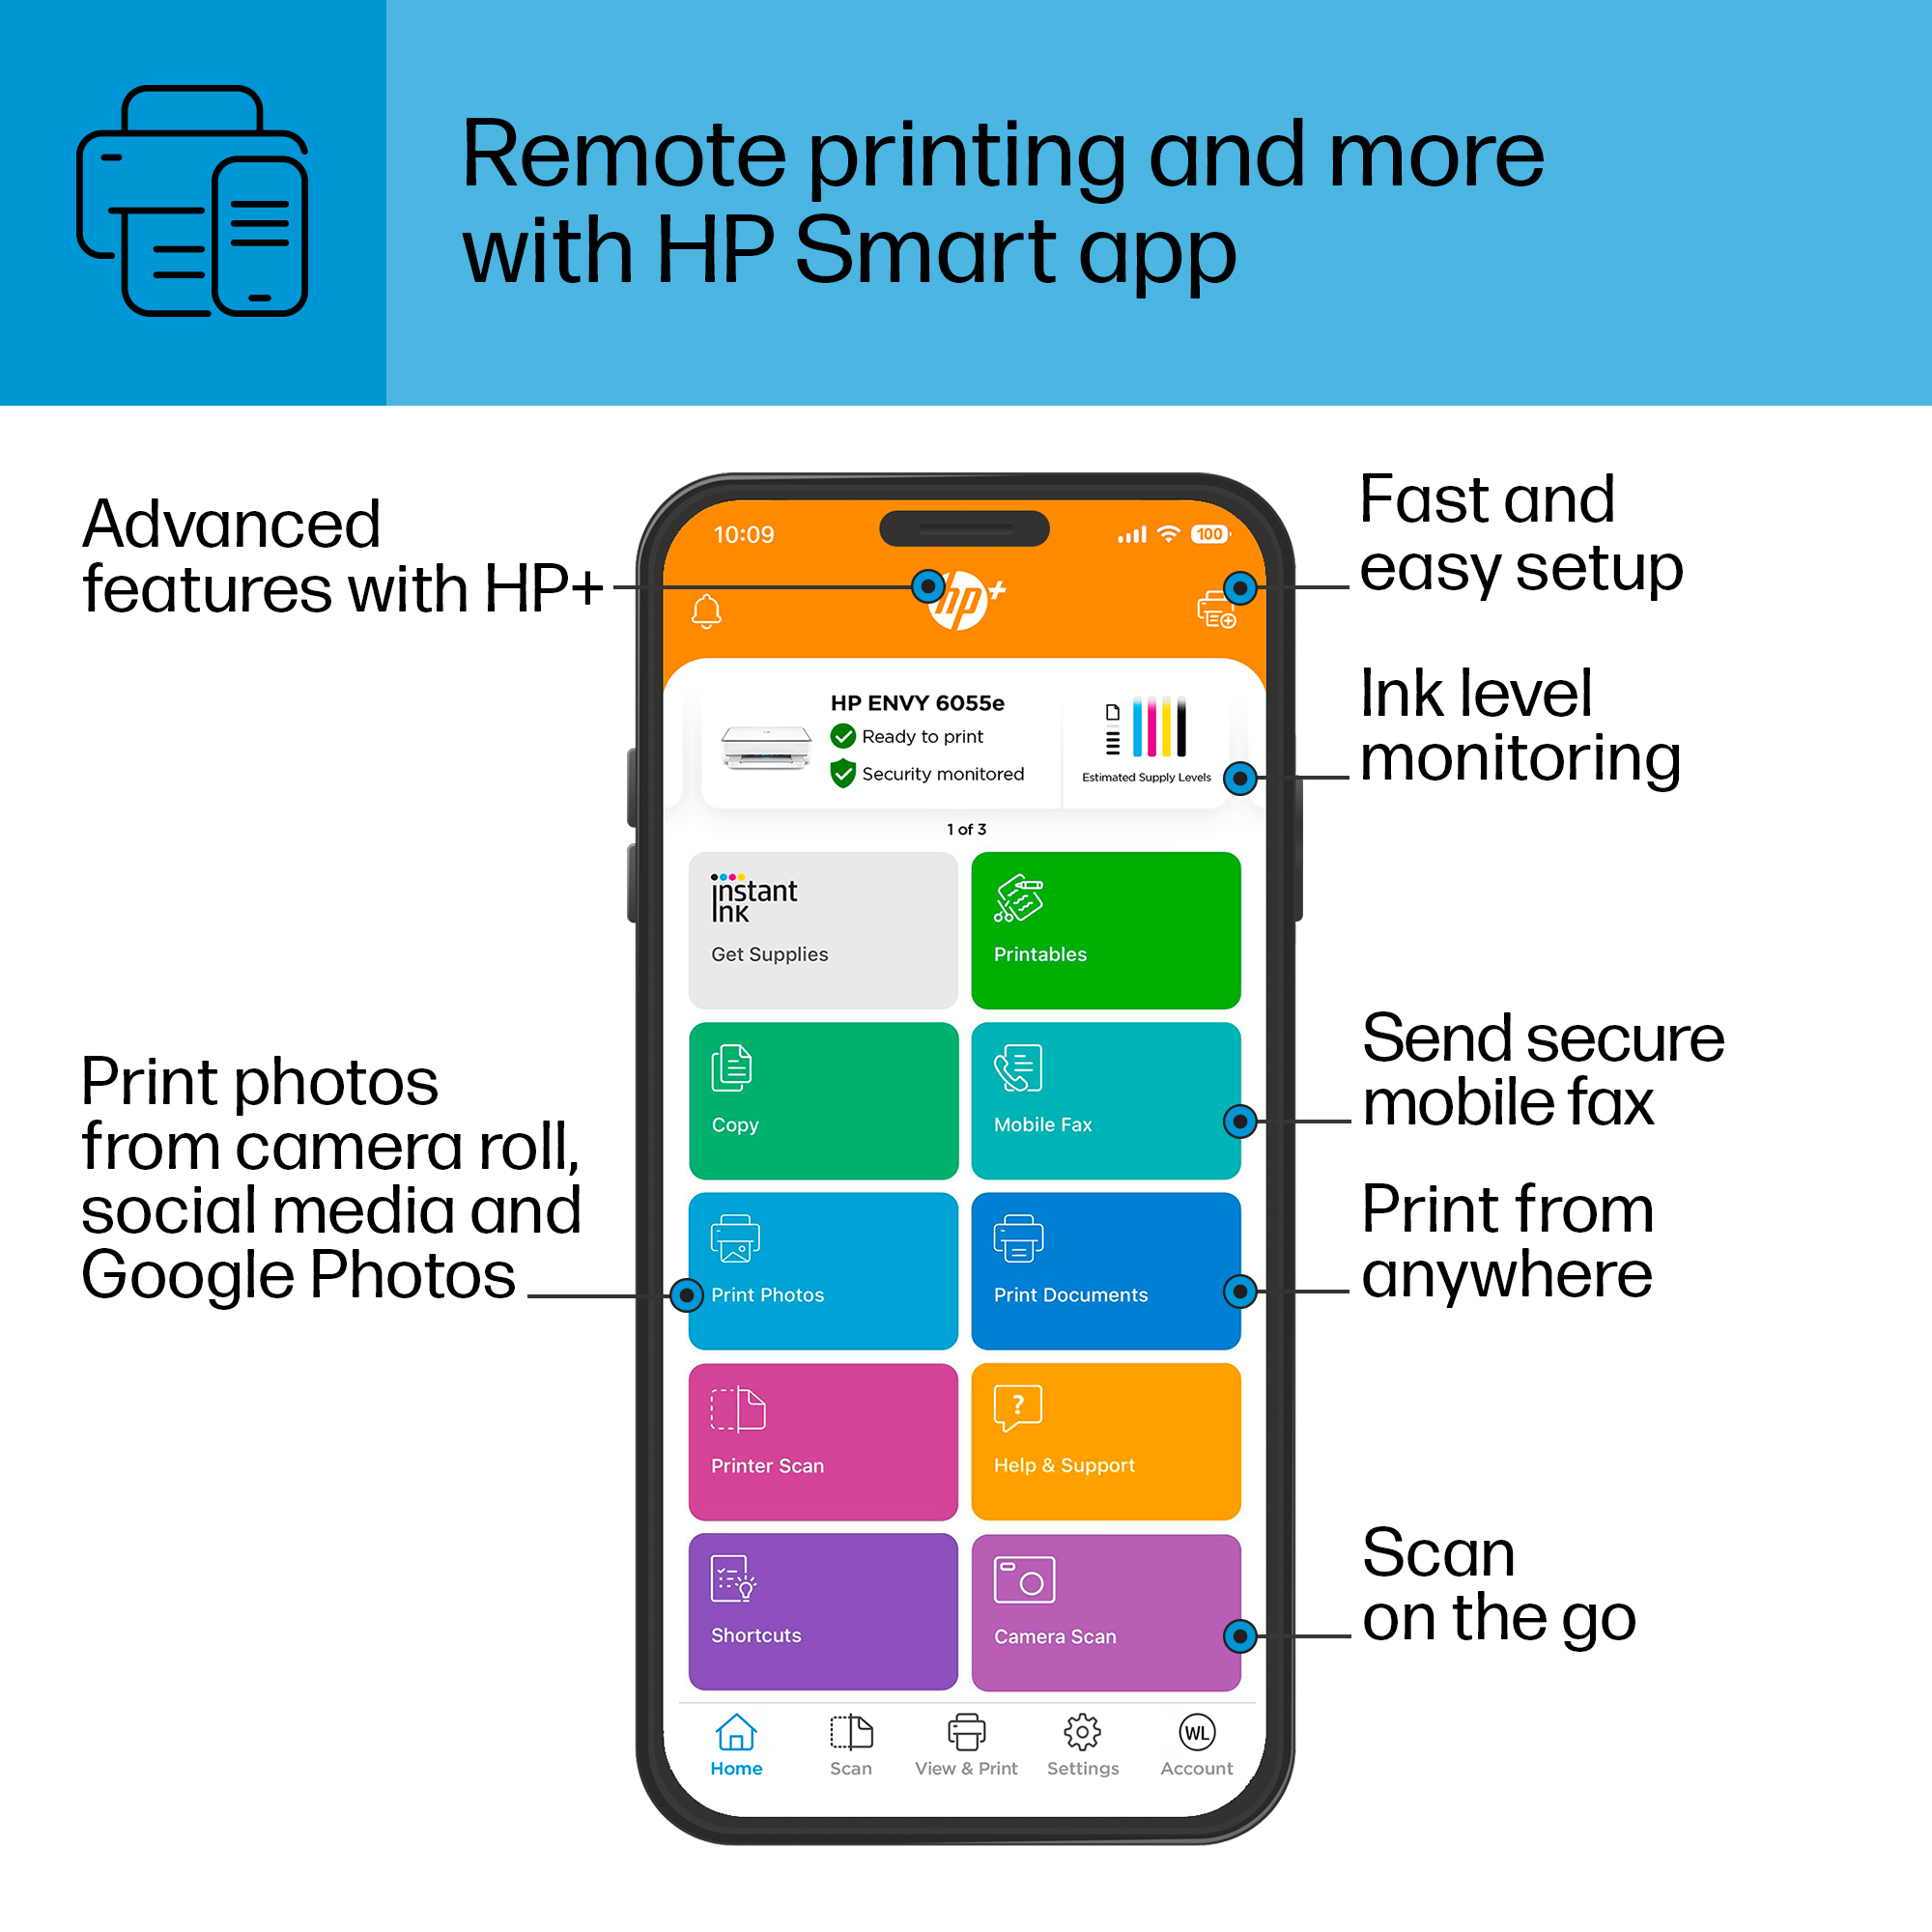 HP ENVY 6055e All-in-One Wireless Color Inkjet Printer -  3 Months Free Instant Ink with HP+ - image 16 of 19